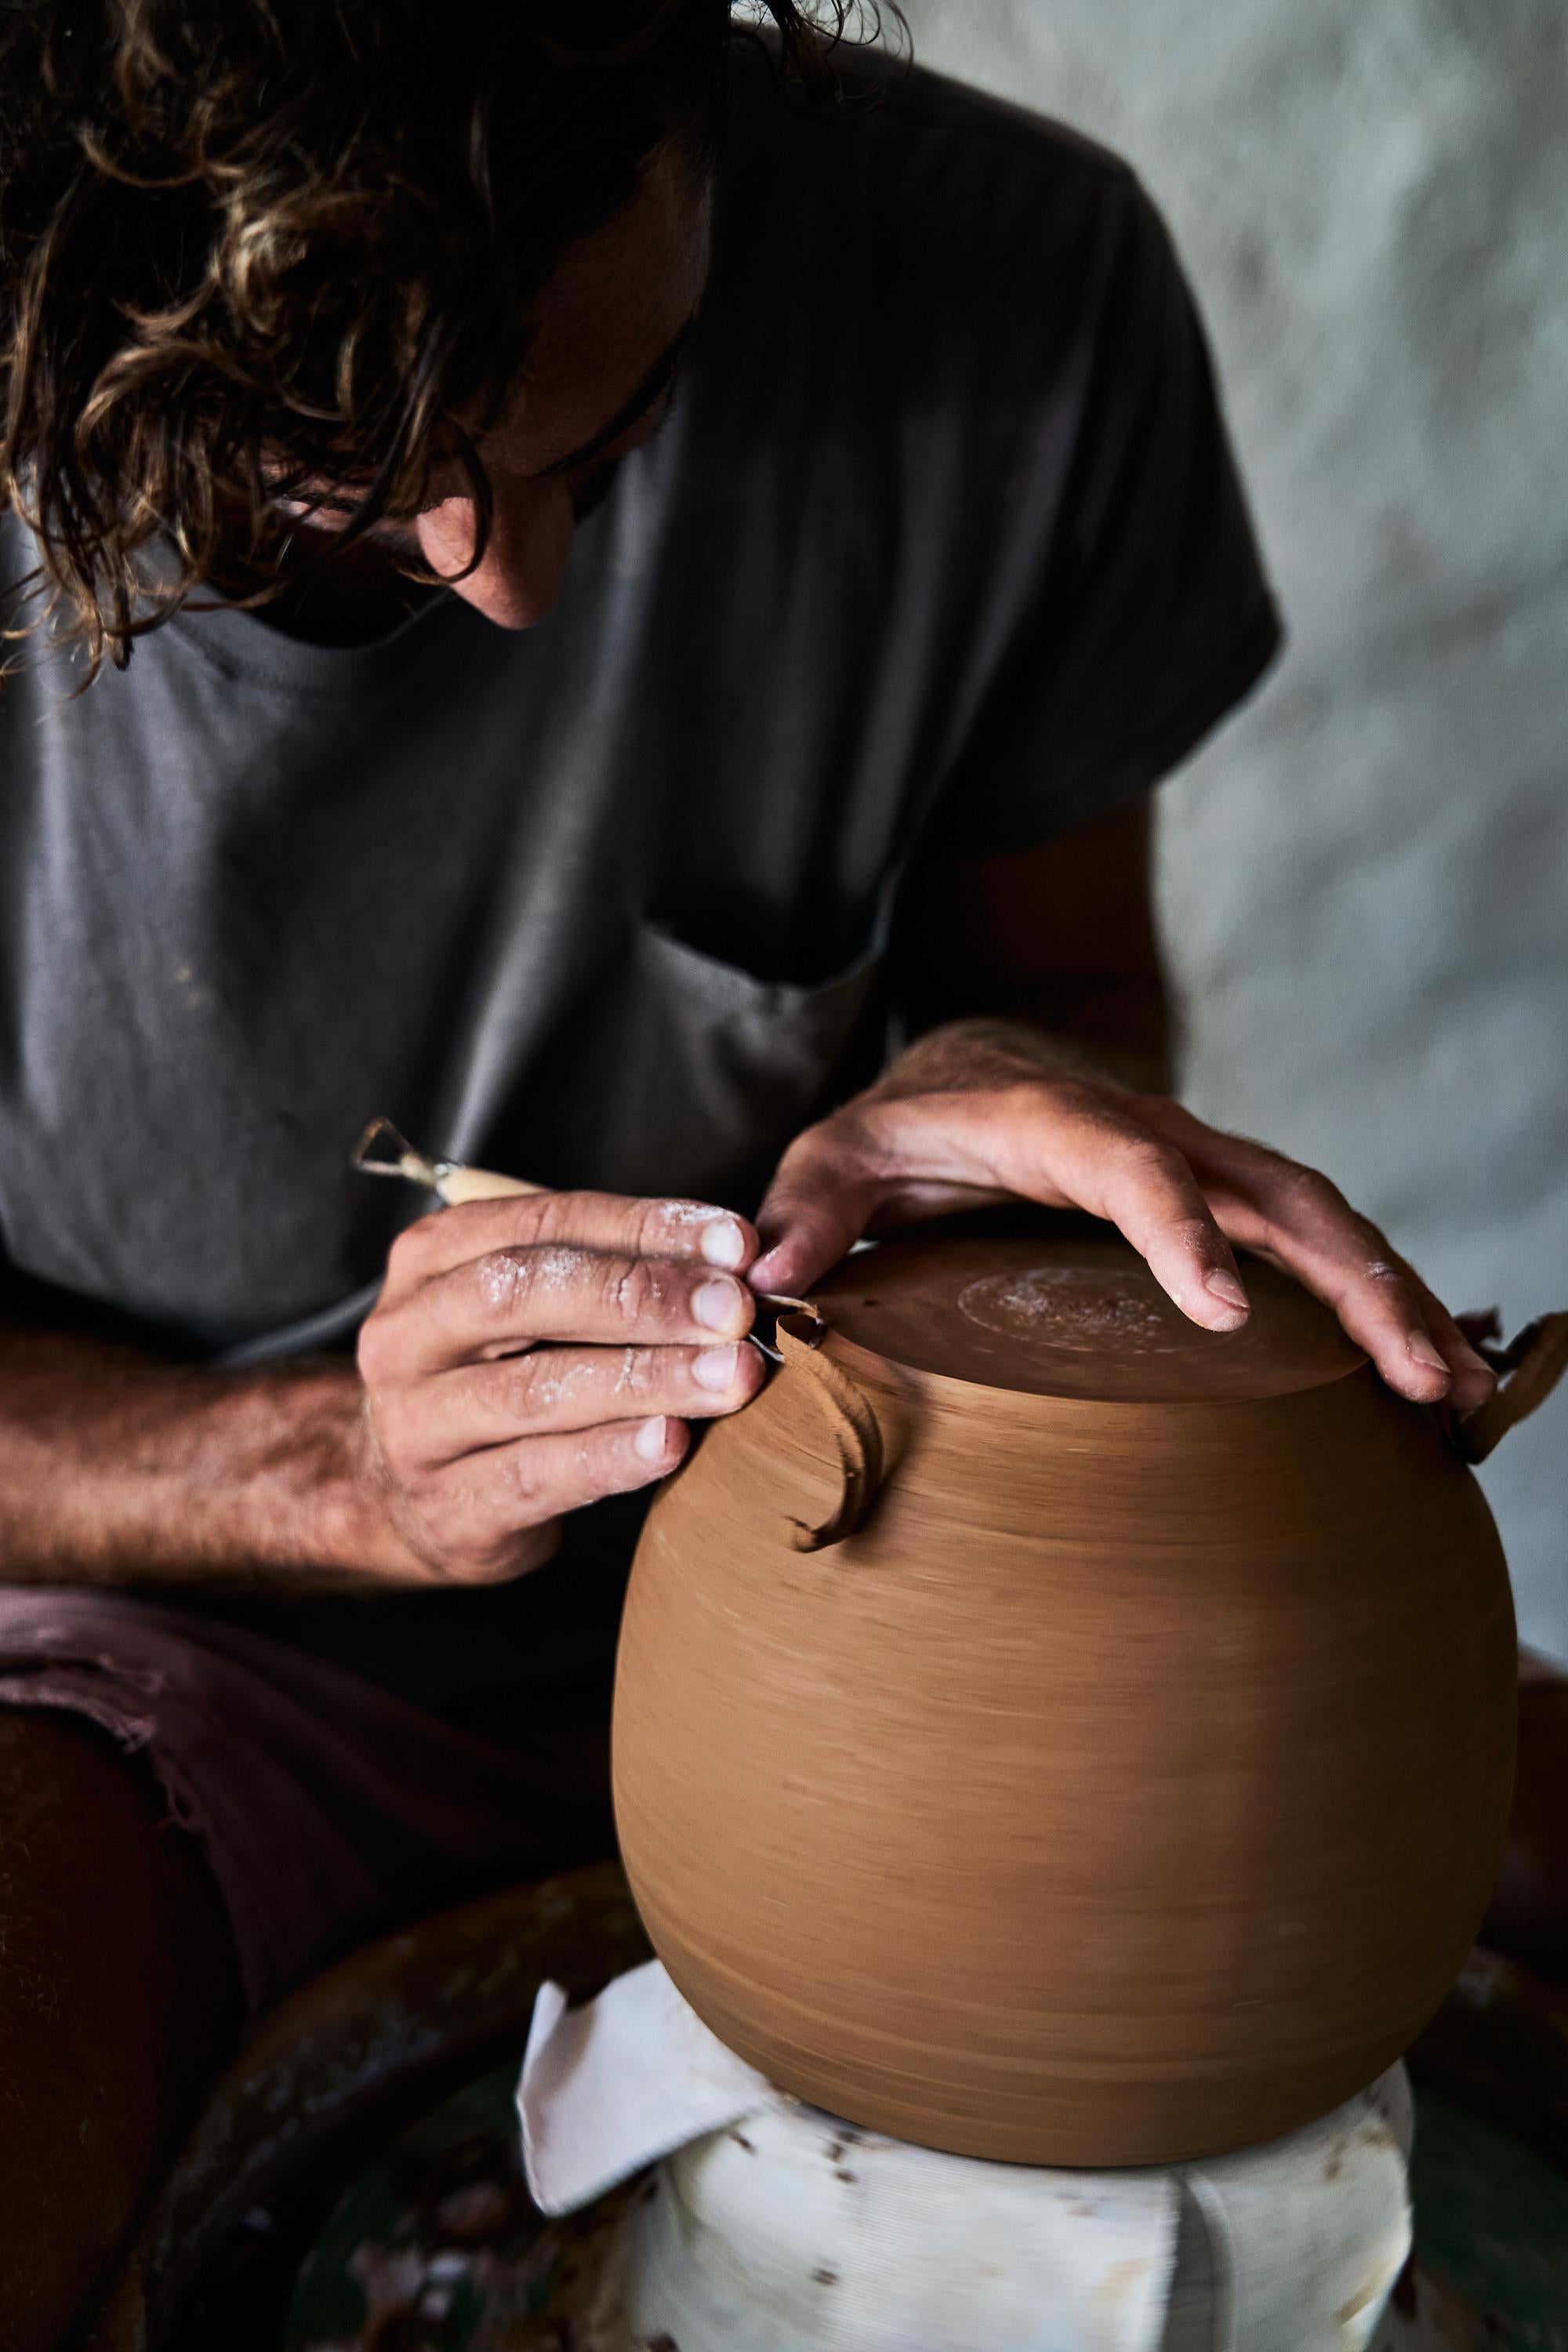 Joseph Skoby is a Southern Californian whose work is inspired by the nature of his native state. His ceramics, created in his own lush garden, recall his intimate dance with the ocean as a lifelong surfer, a pure form of self-expression that